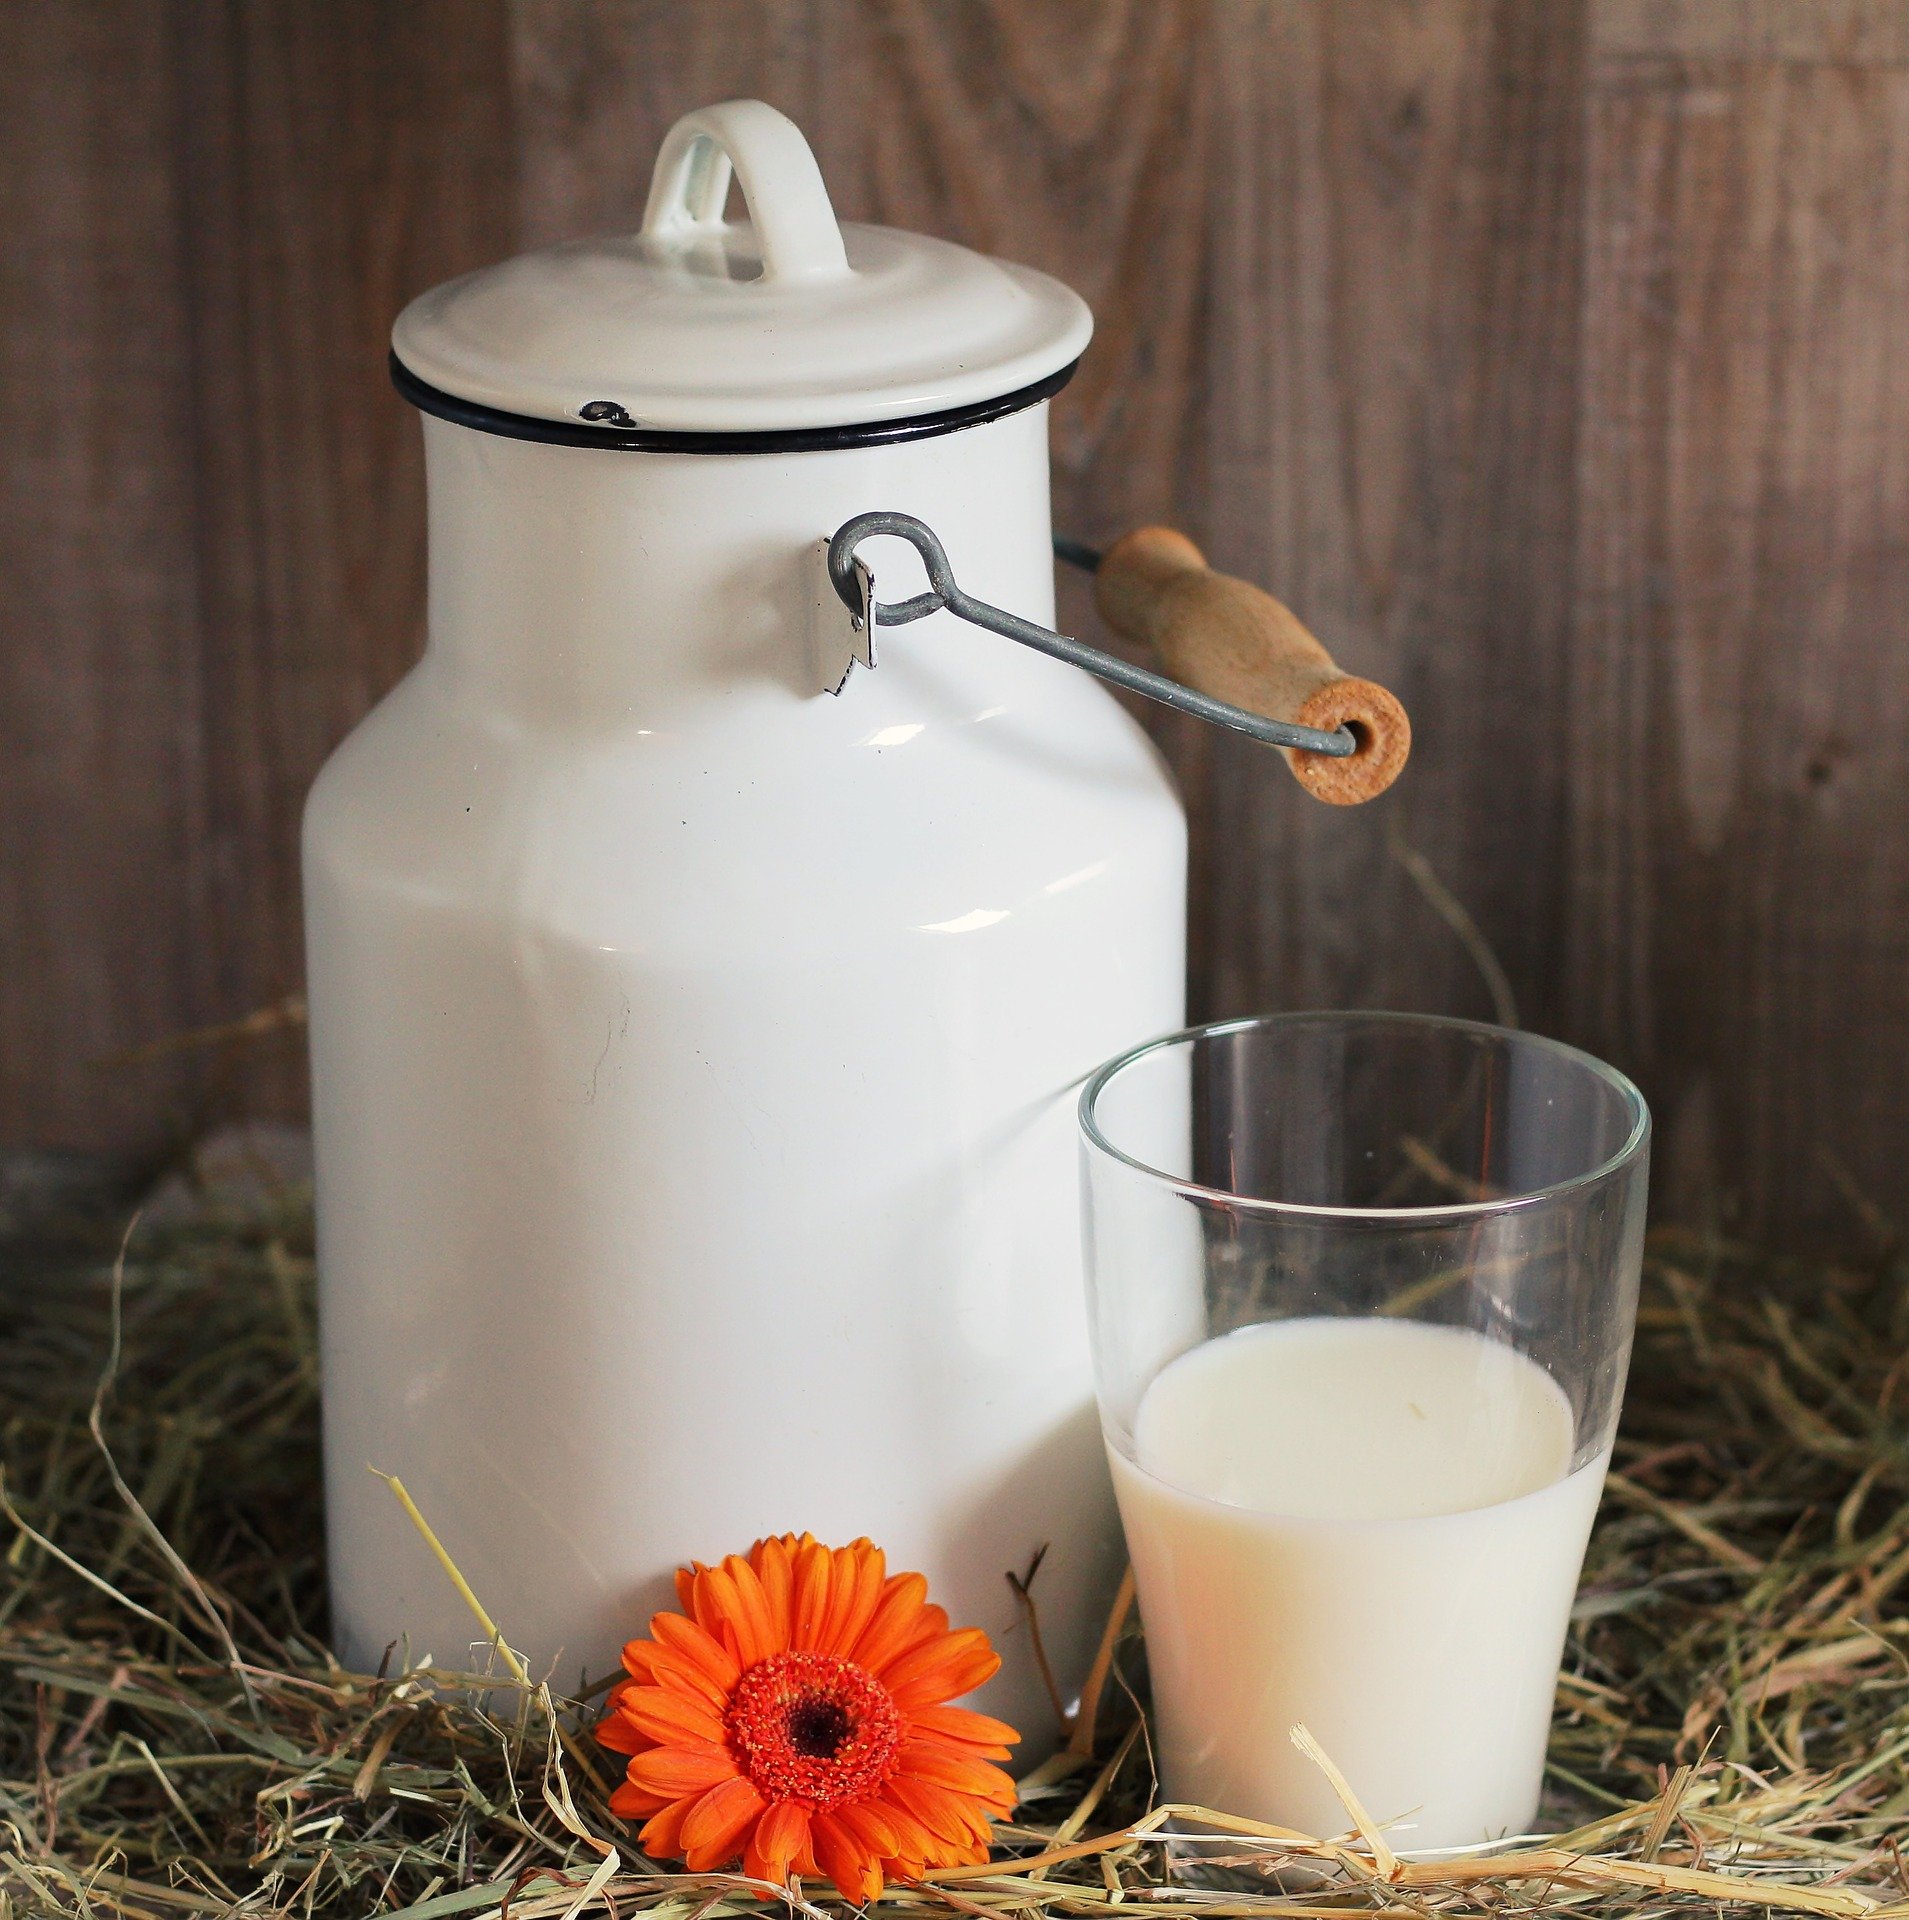 How To Make Dairy-Free Milk Almond or Cashew